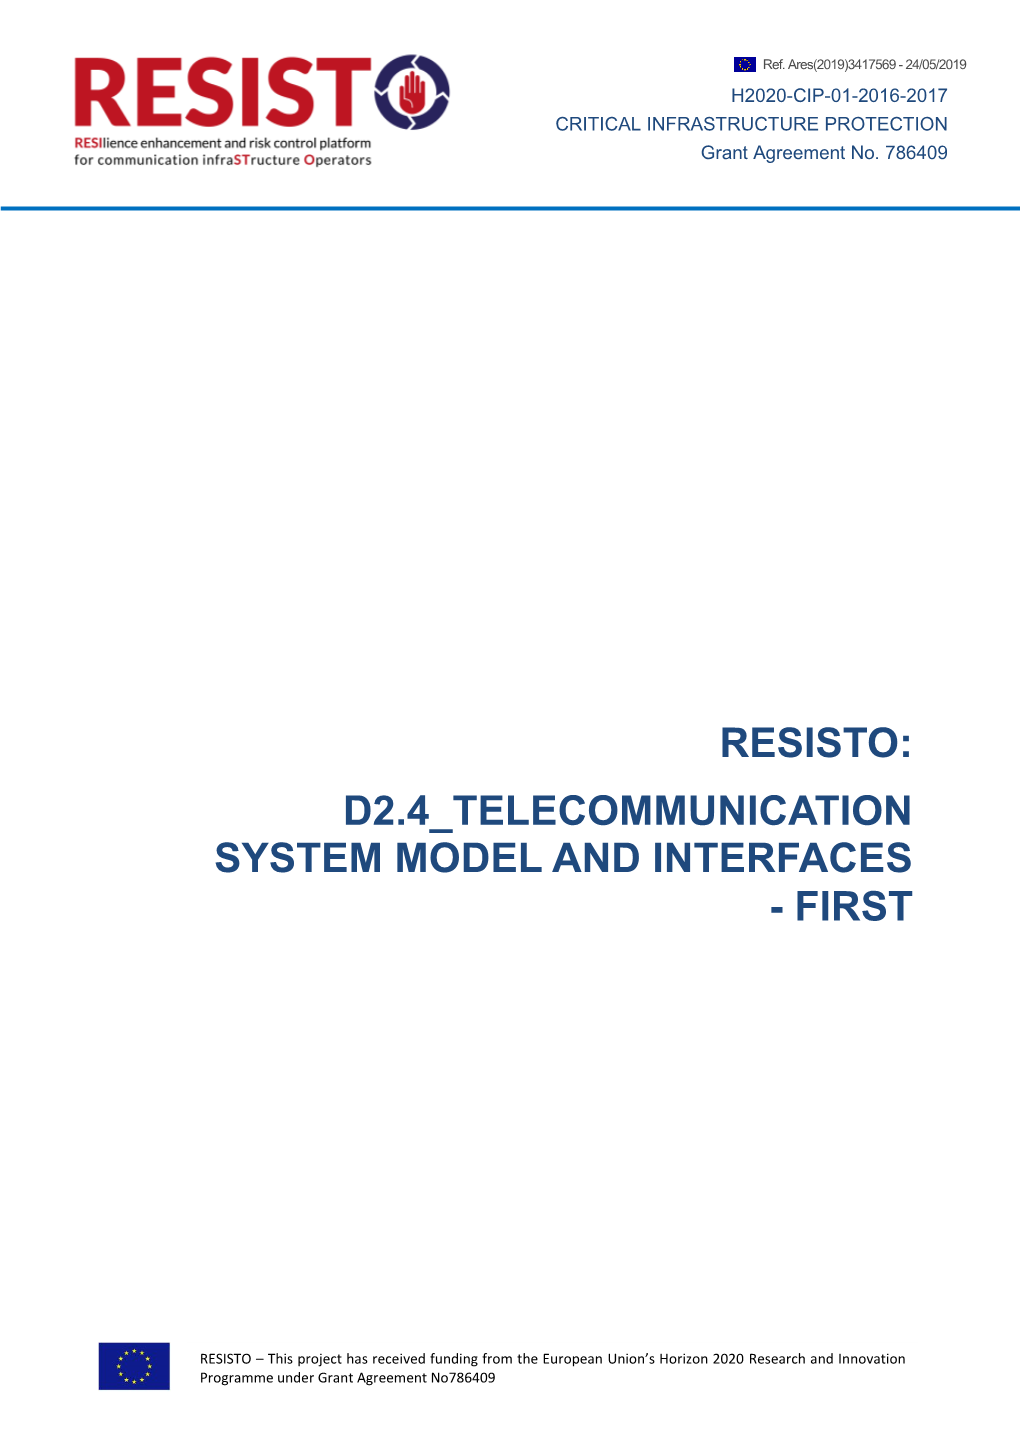 Telecommunication System Model and Interfaces - First